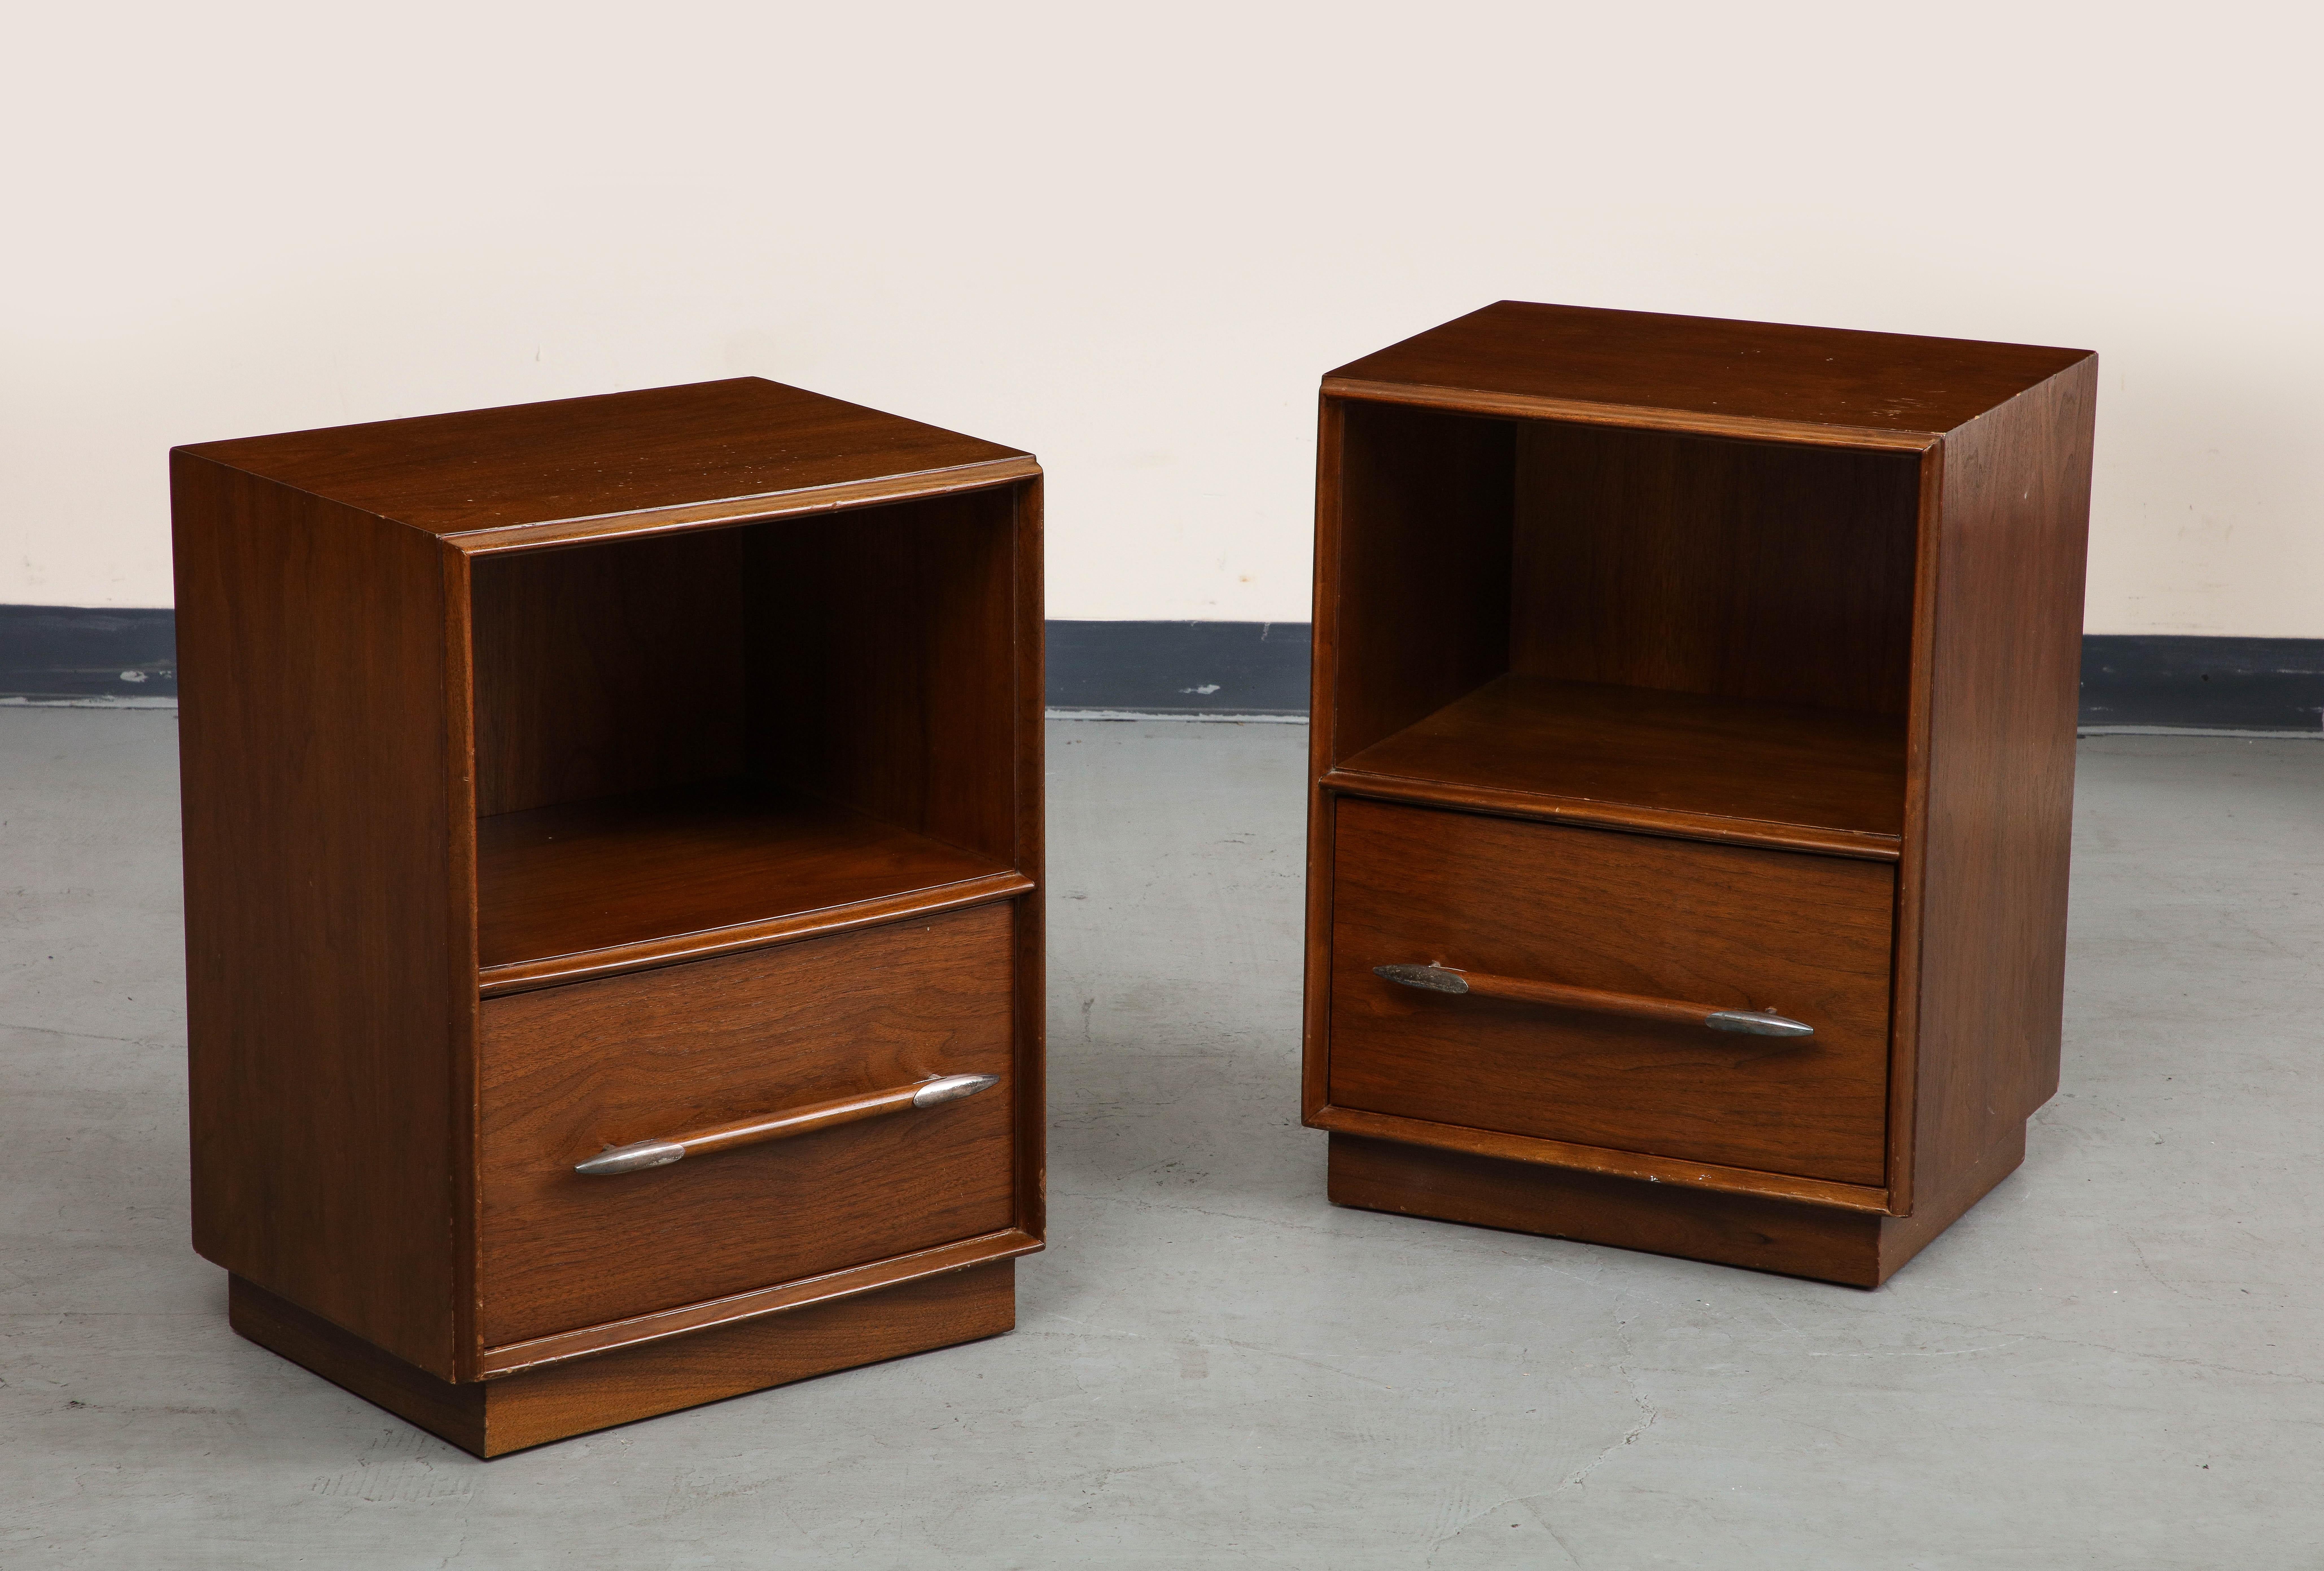 American Pair of 1950s Walnut Nightstands or End Tables, Robsjohn-Gibbings for Widdicomb For Sale